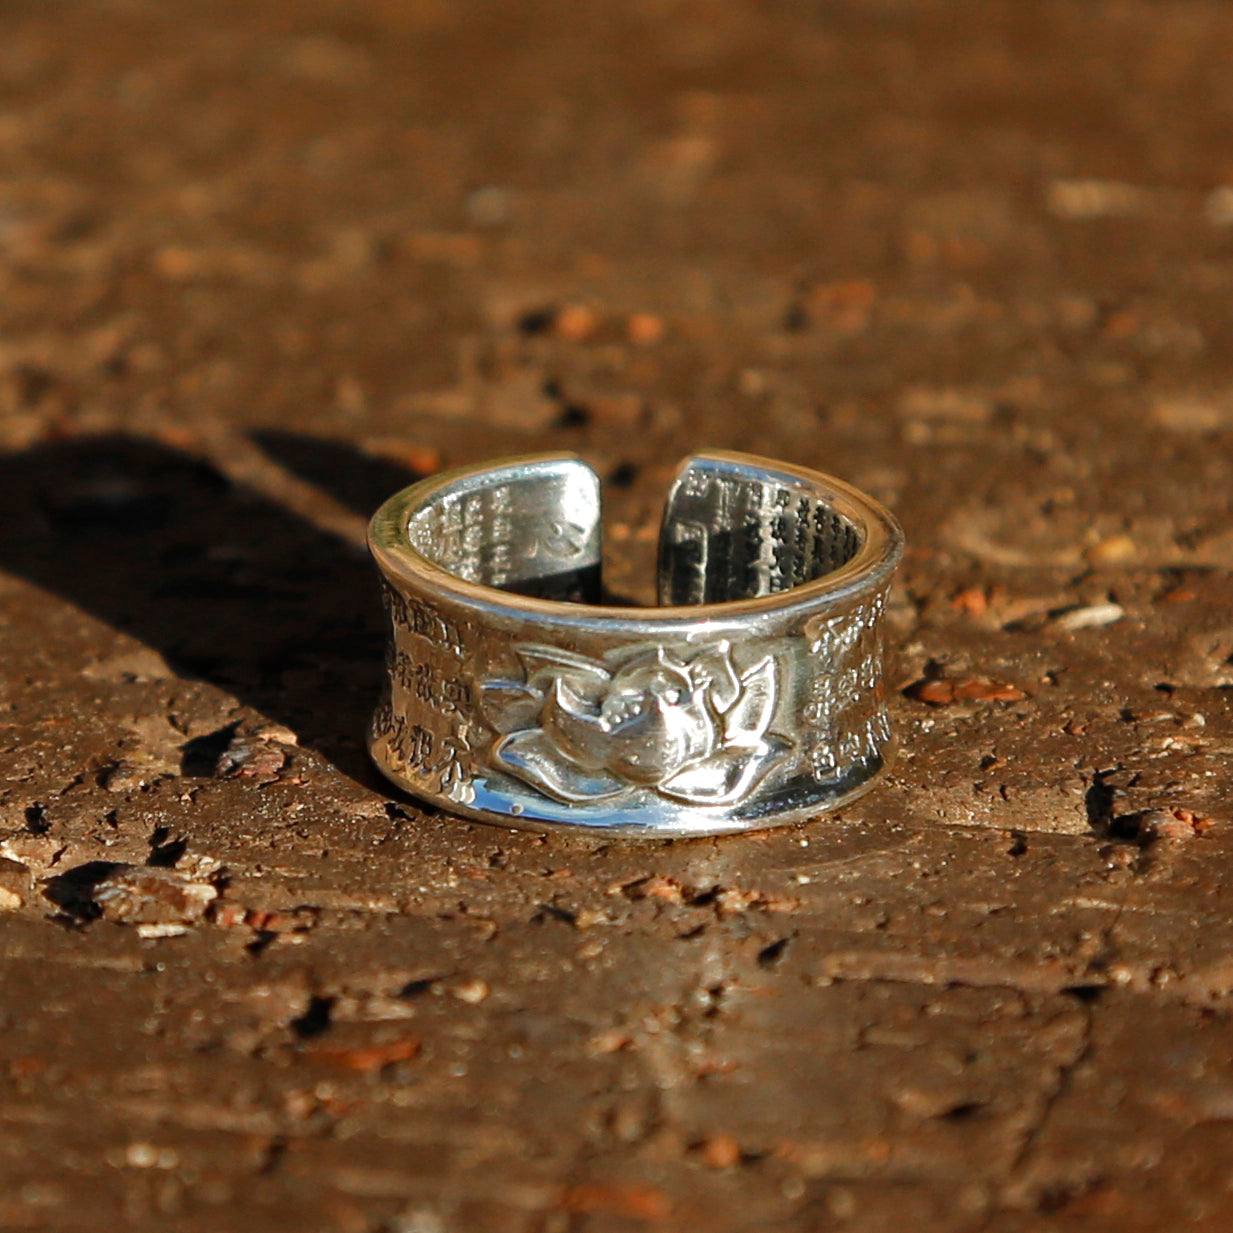 Engraved Lotus with Buddhist Sutra Adjustable Sterling Silver Ring, Tibetan Buddhist Ring, Meditation Ring - ZentralDesigns